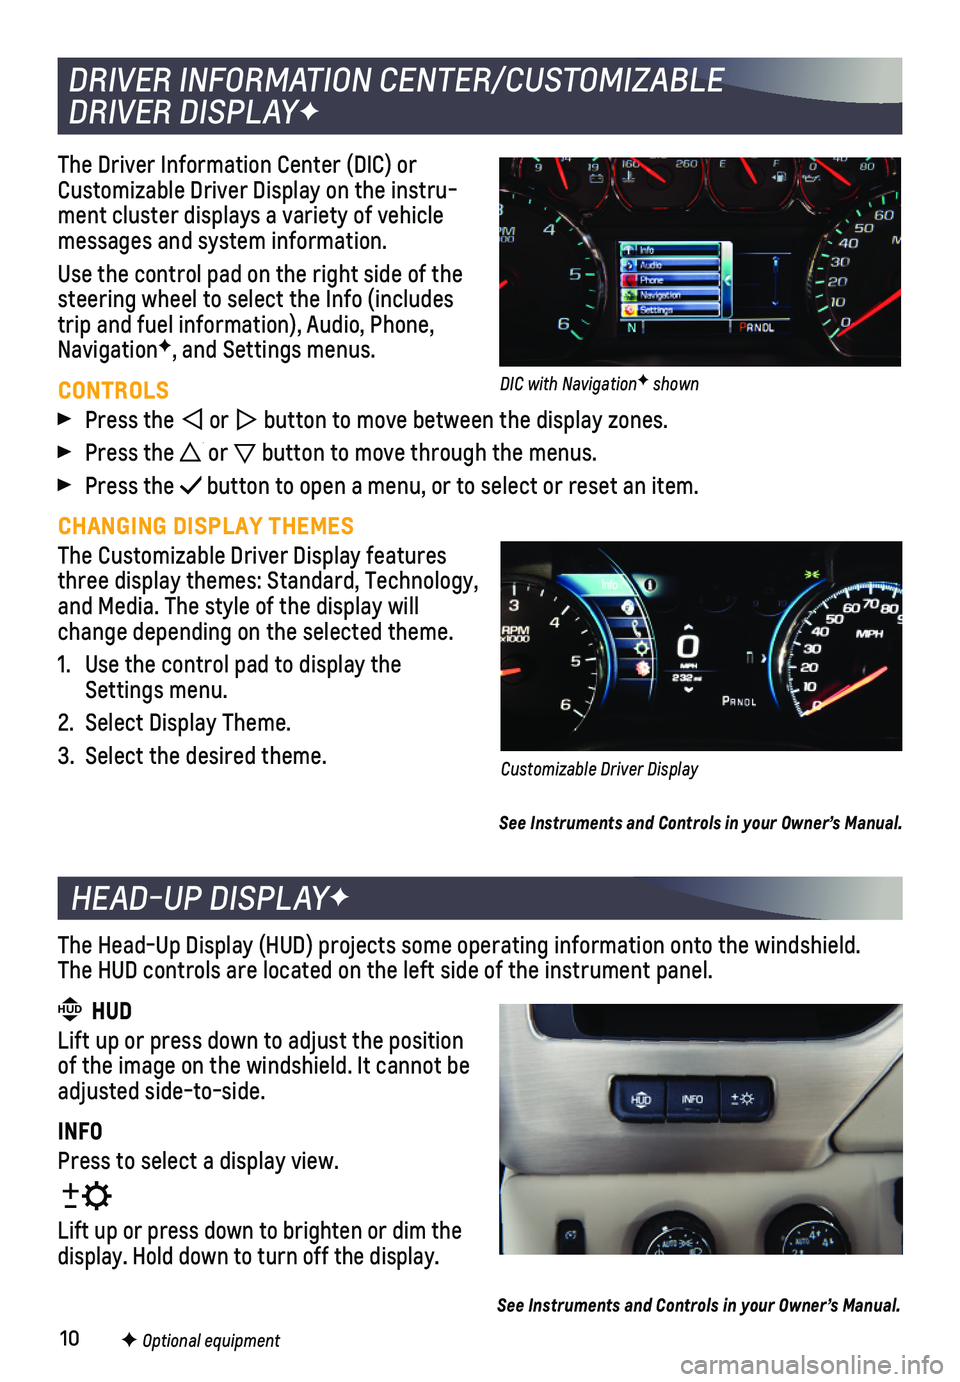 CHEVROLET SUBURBAN 2020  Get To Know Guide 10
The Driver Information Center (DIC) or Customizable Driver Display on the instru-ment cluster displays a variety of vehicle messages and system information.
Use the control pad on the right side of